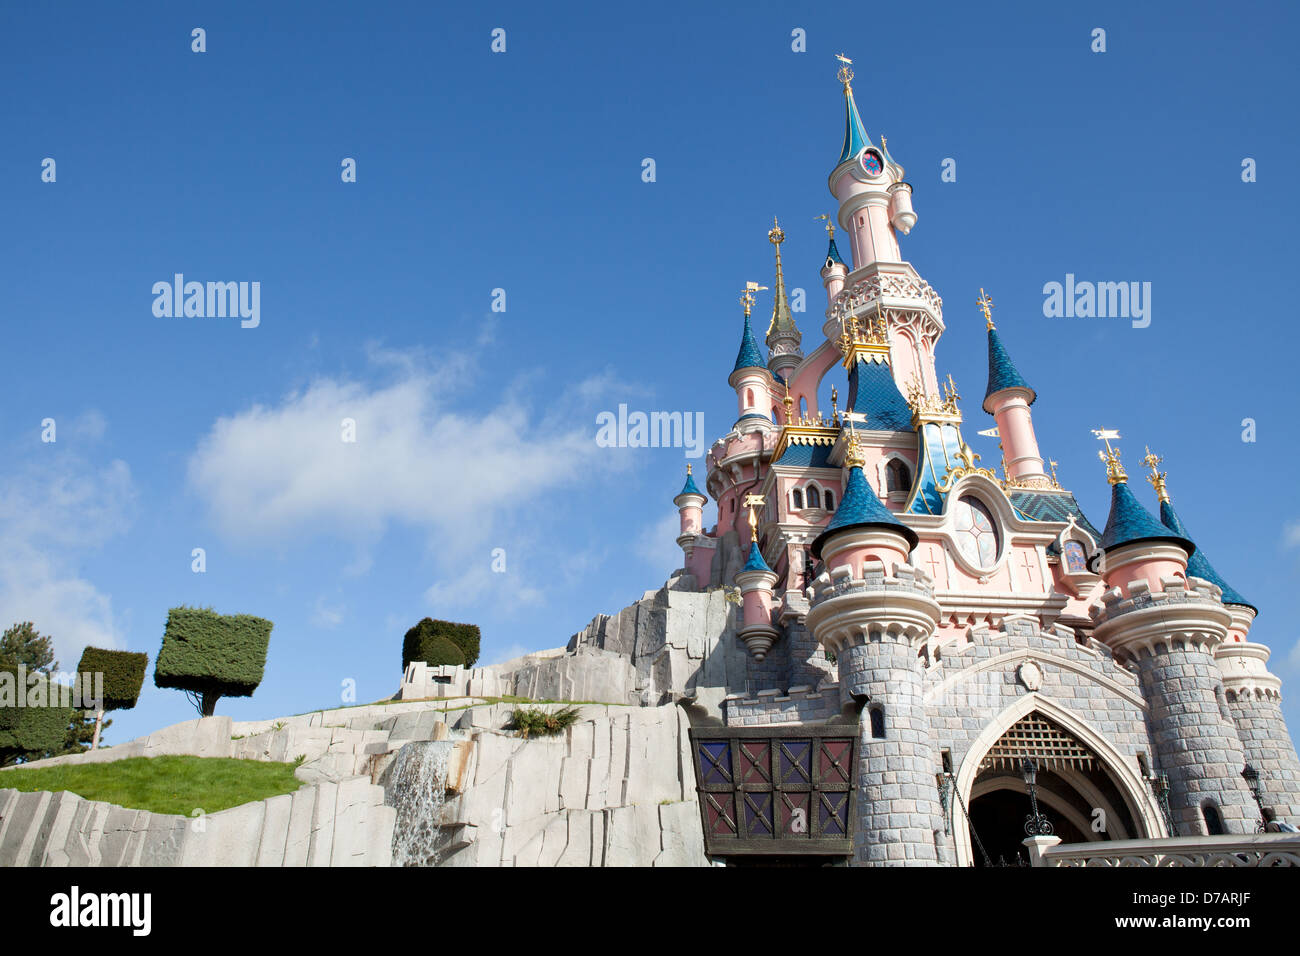 The Sleeping Beauty Castle at Disneyland Paris in France Stock Photo - Alamy